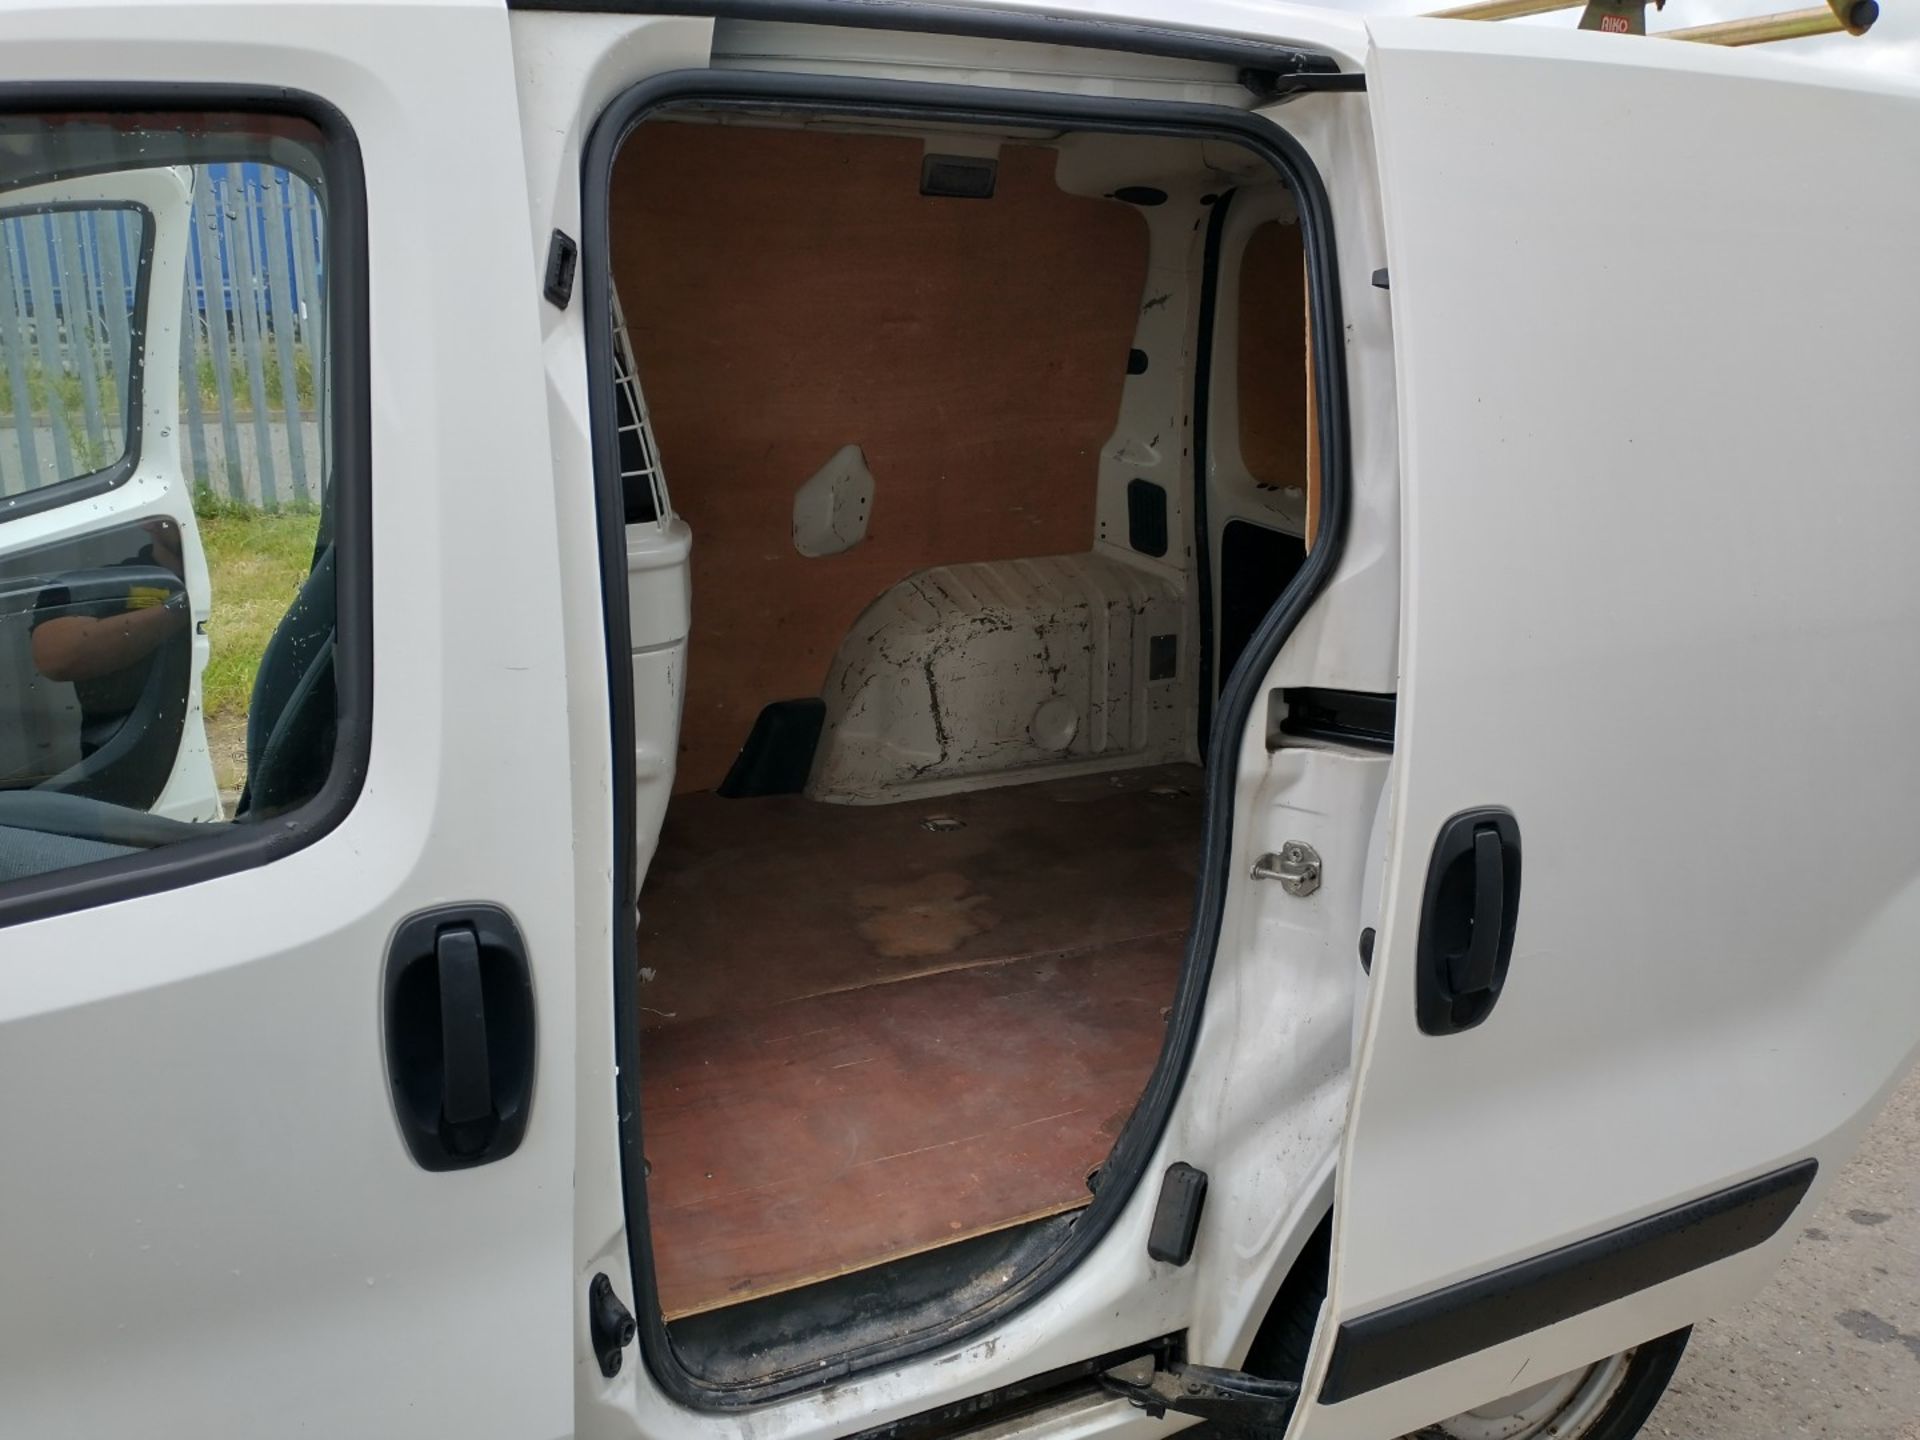 2015 Peugeot Bipper S Hdi White Panel - CL505 - Ref: VVS031 - Location: Corby, Northamptonshire106, - Image 3 of 16